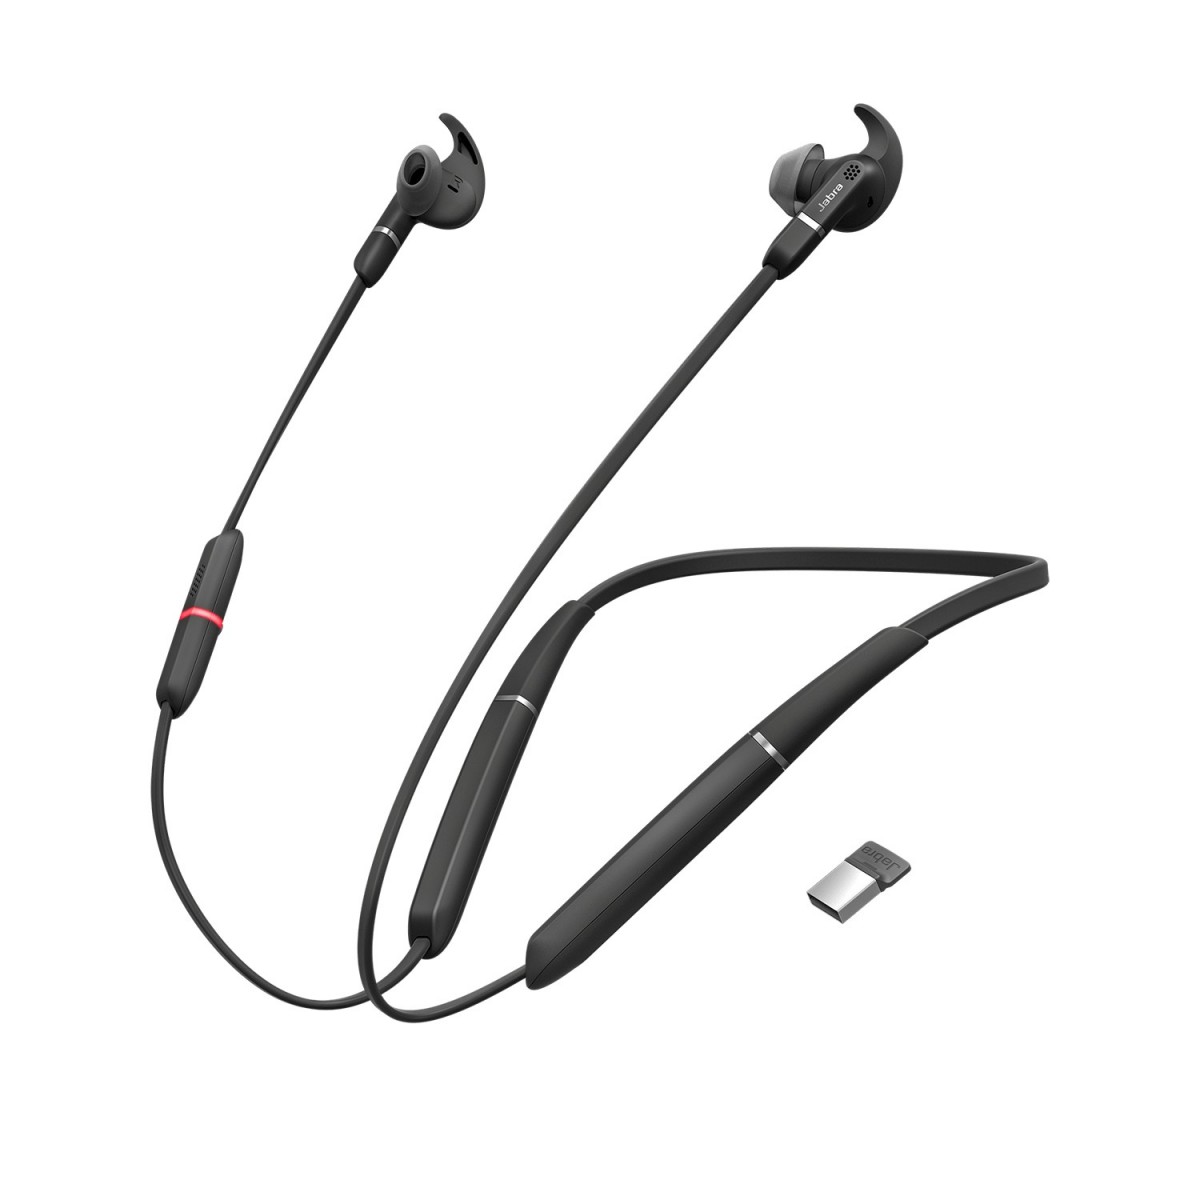 Jabra Evolve 65e MS & Link 370 - Headset - Neck-band - Office/Call center - Black - Binaural - Play/Pause - Track < - Track > - 